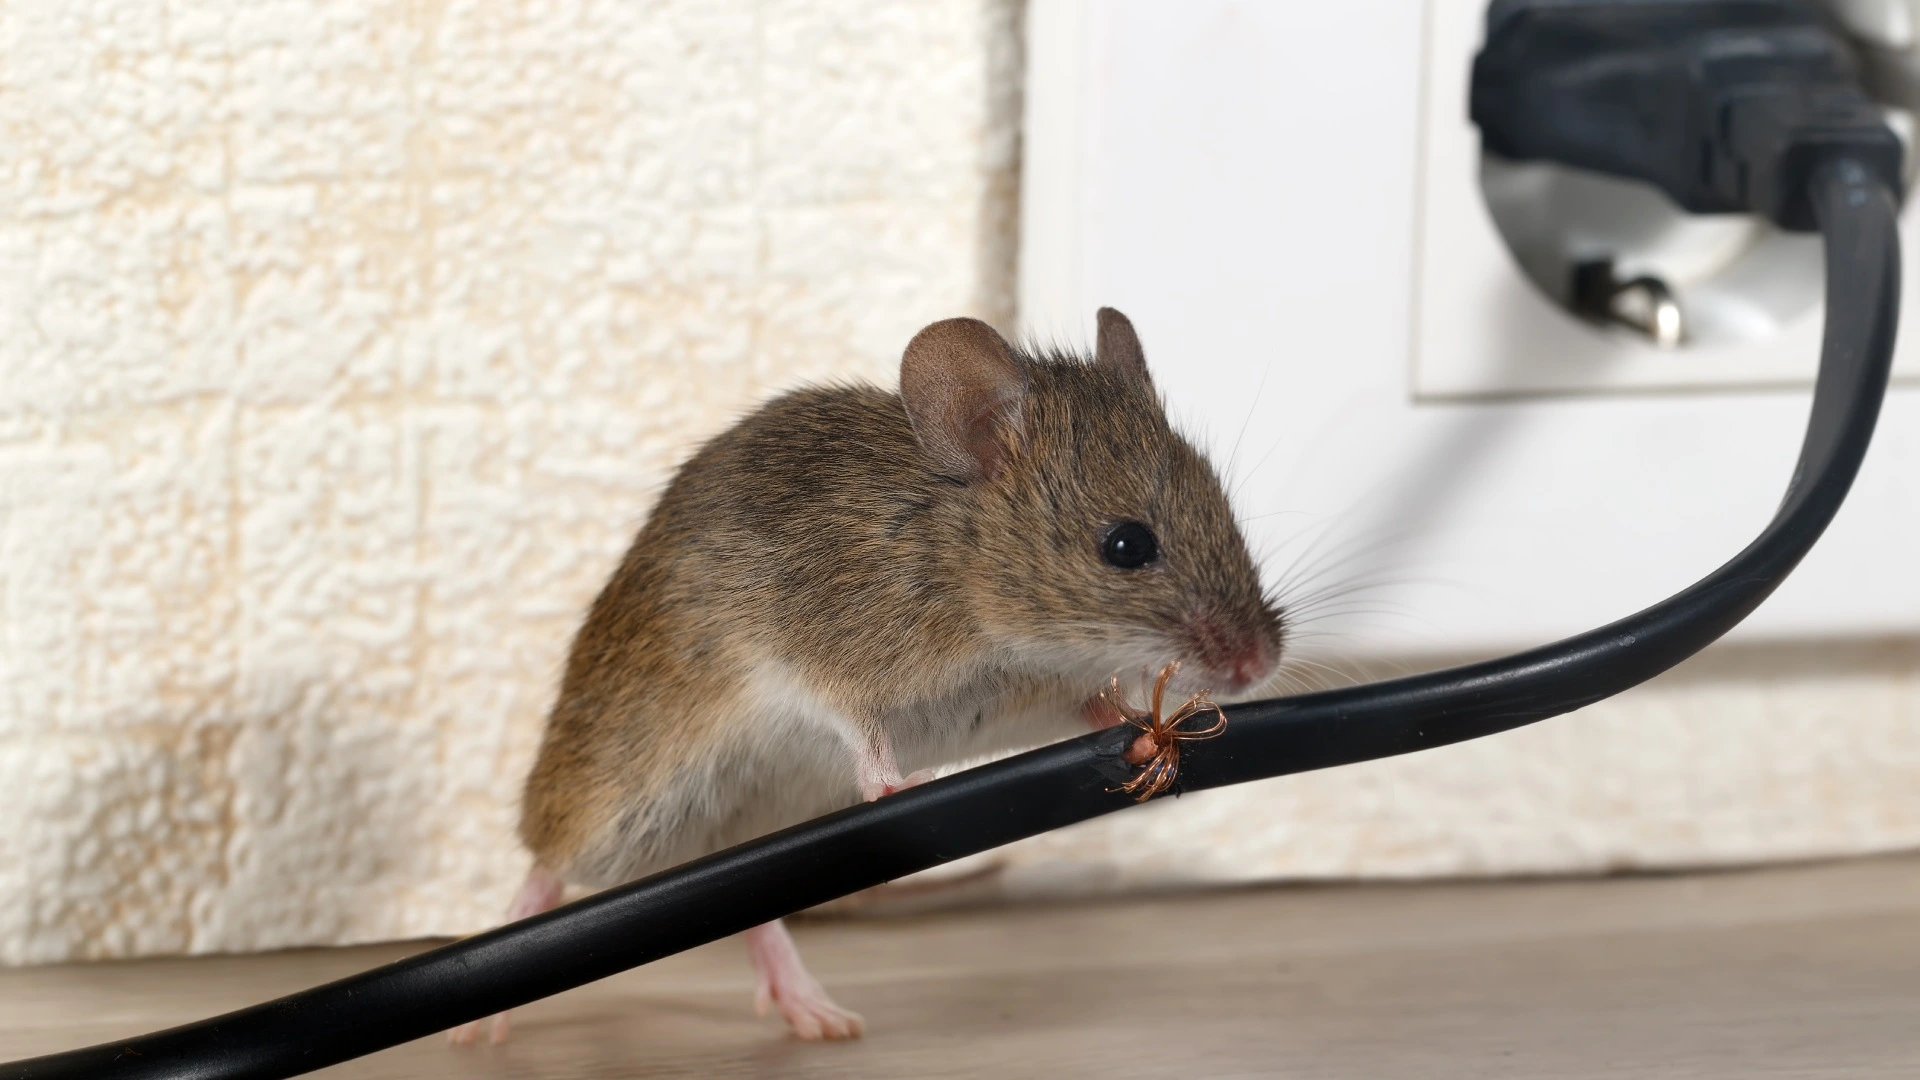 A mouse found chewing wire in home in Escanaba, MI.